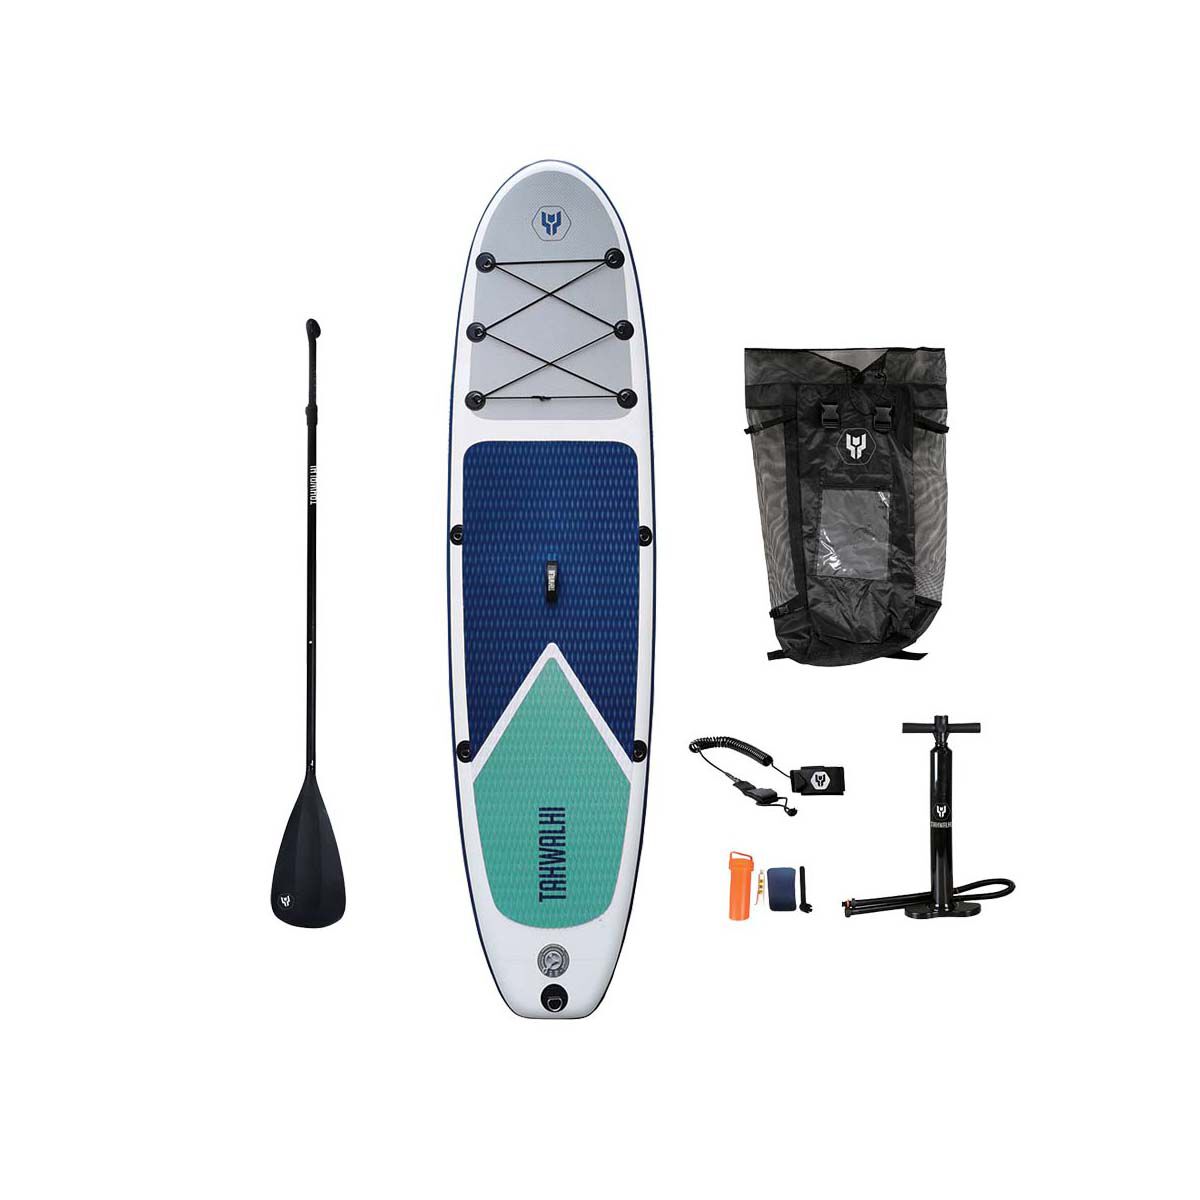 Inflatable SUP Stand Up Paddle Board All round primary-Turquoise Green-10 x 32 x 6 Inflatable SUP Board iSUP Package with All Accessories 